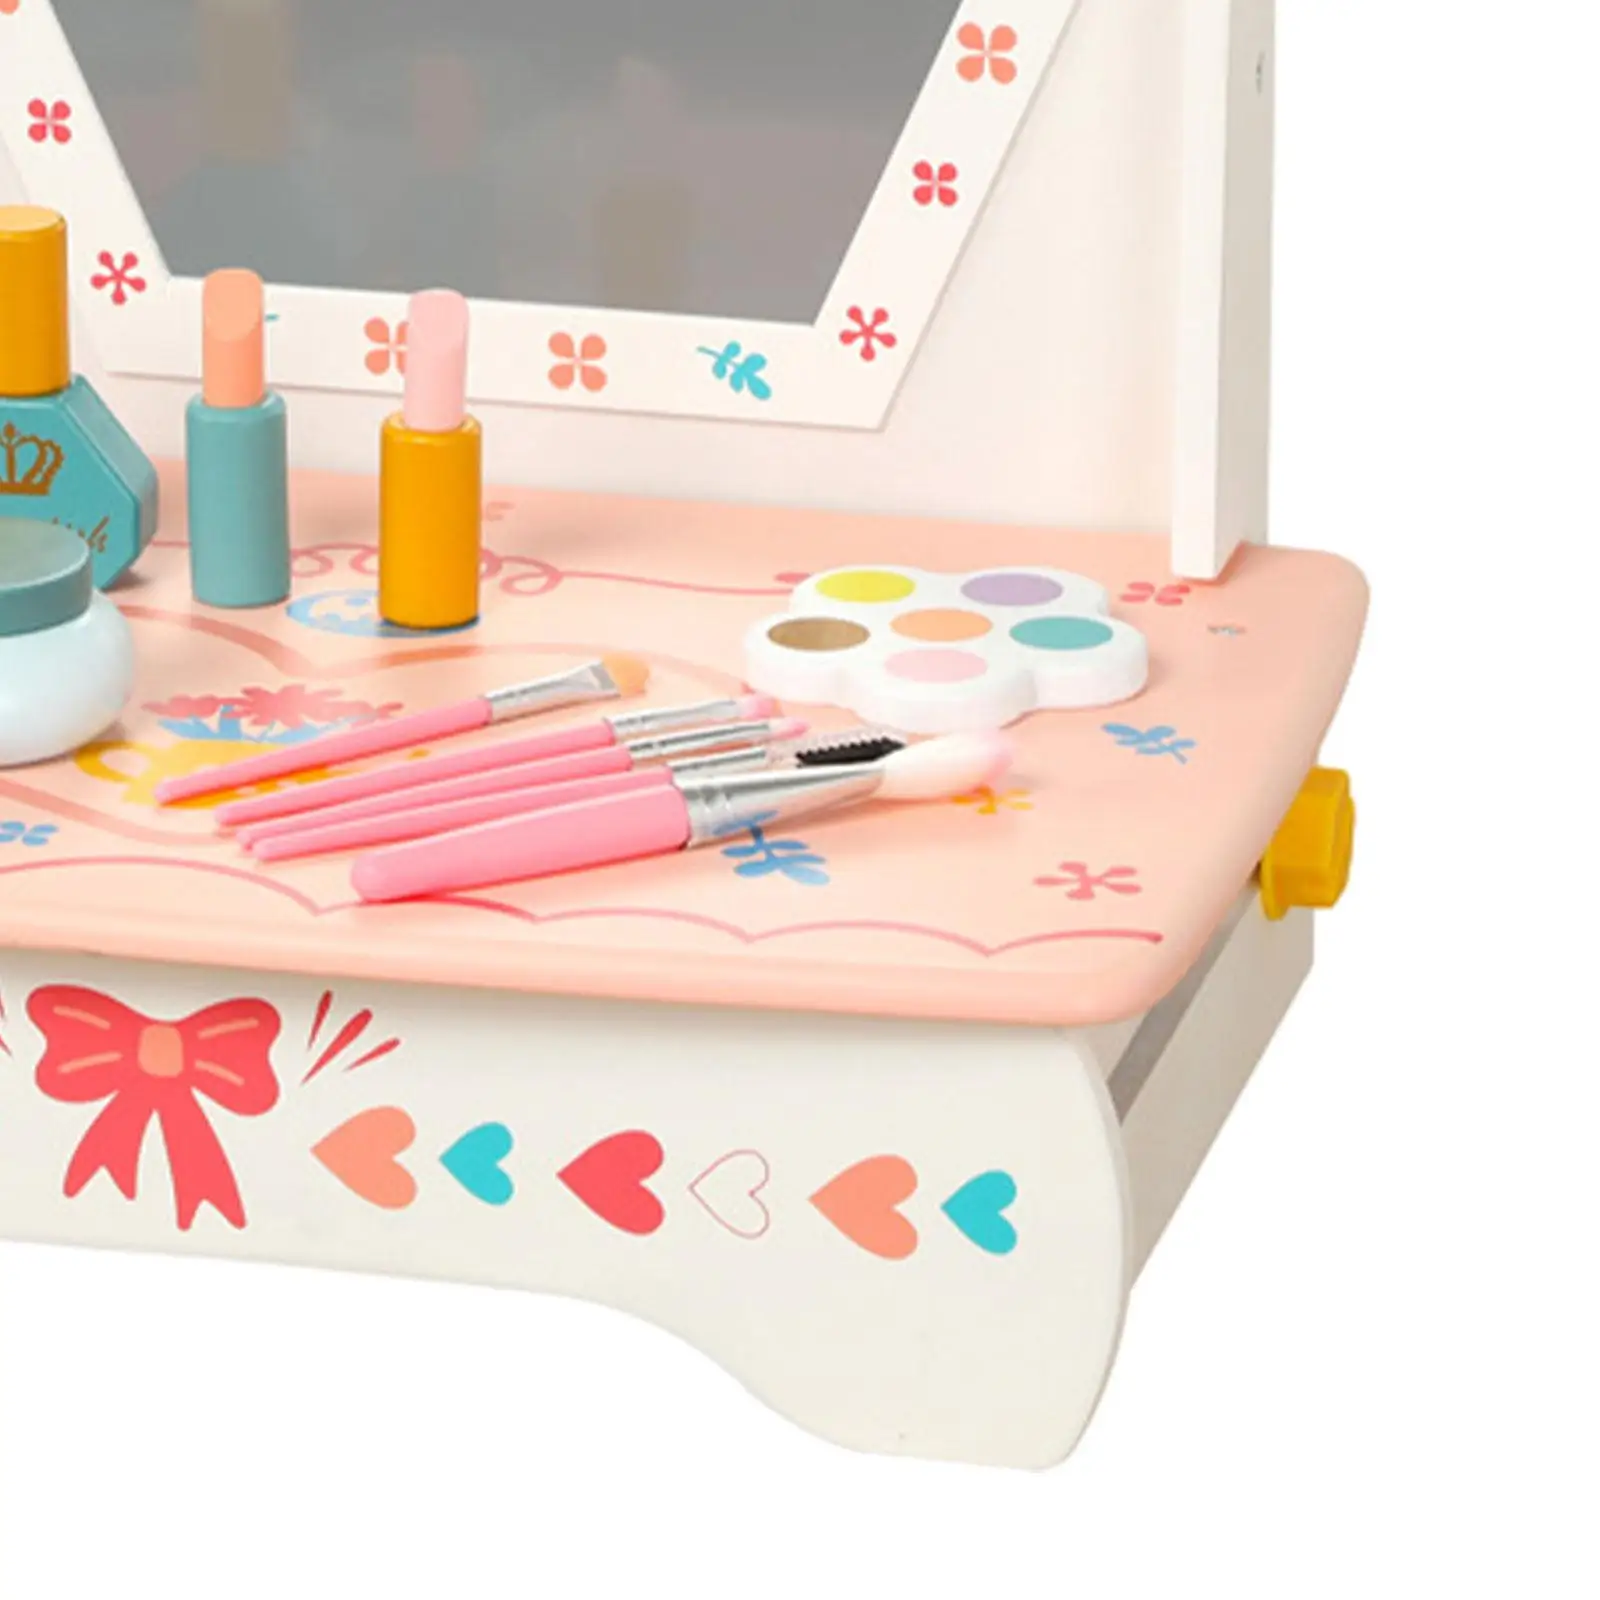 Wooden Vanity Table Toy Birthday Gifts Montessori Beauty Playset Wooden Princess Vanity Table Makeup Pretend Play for Children